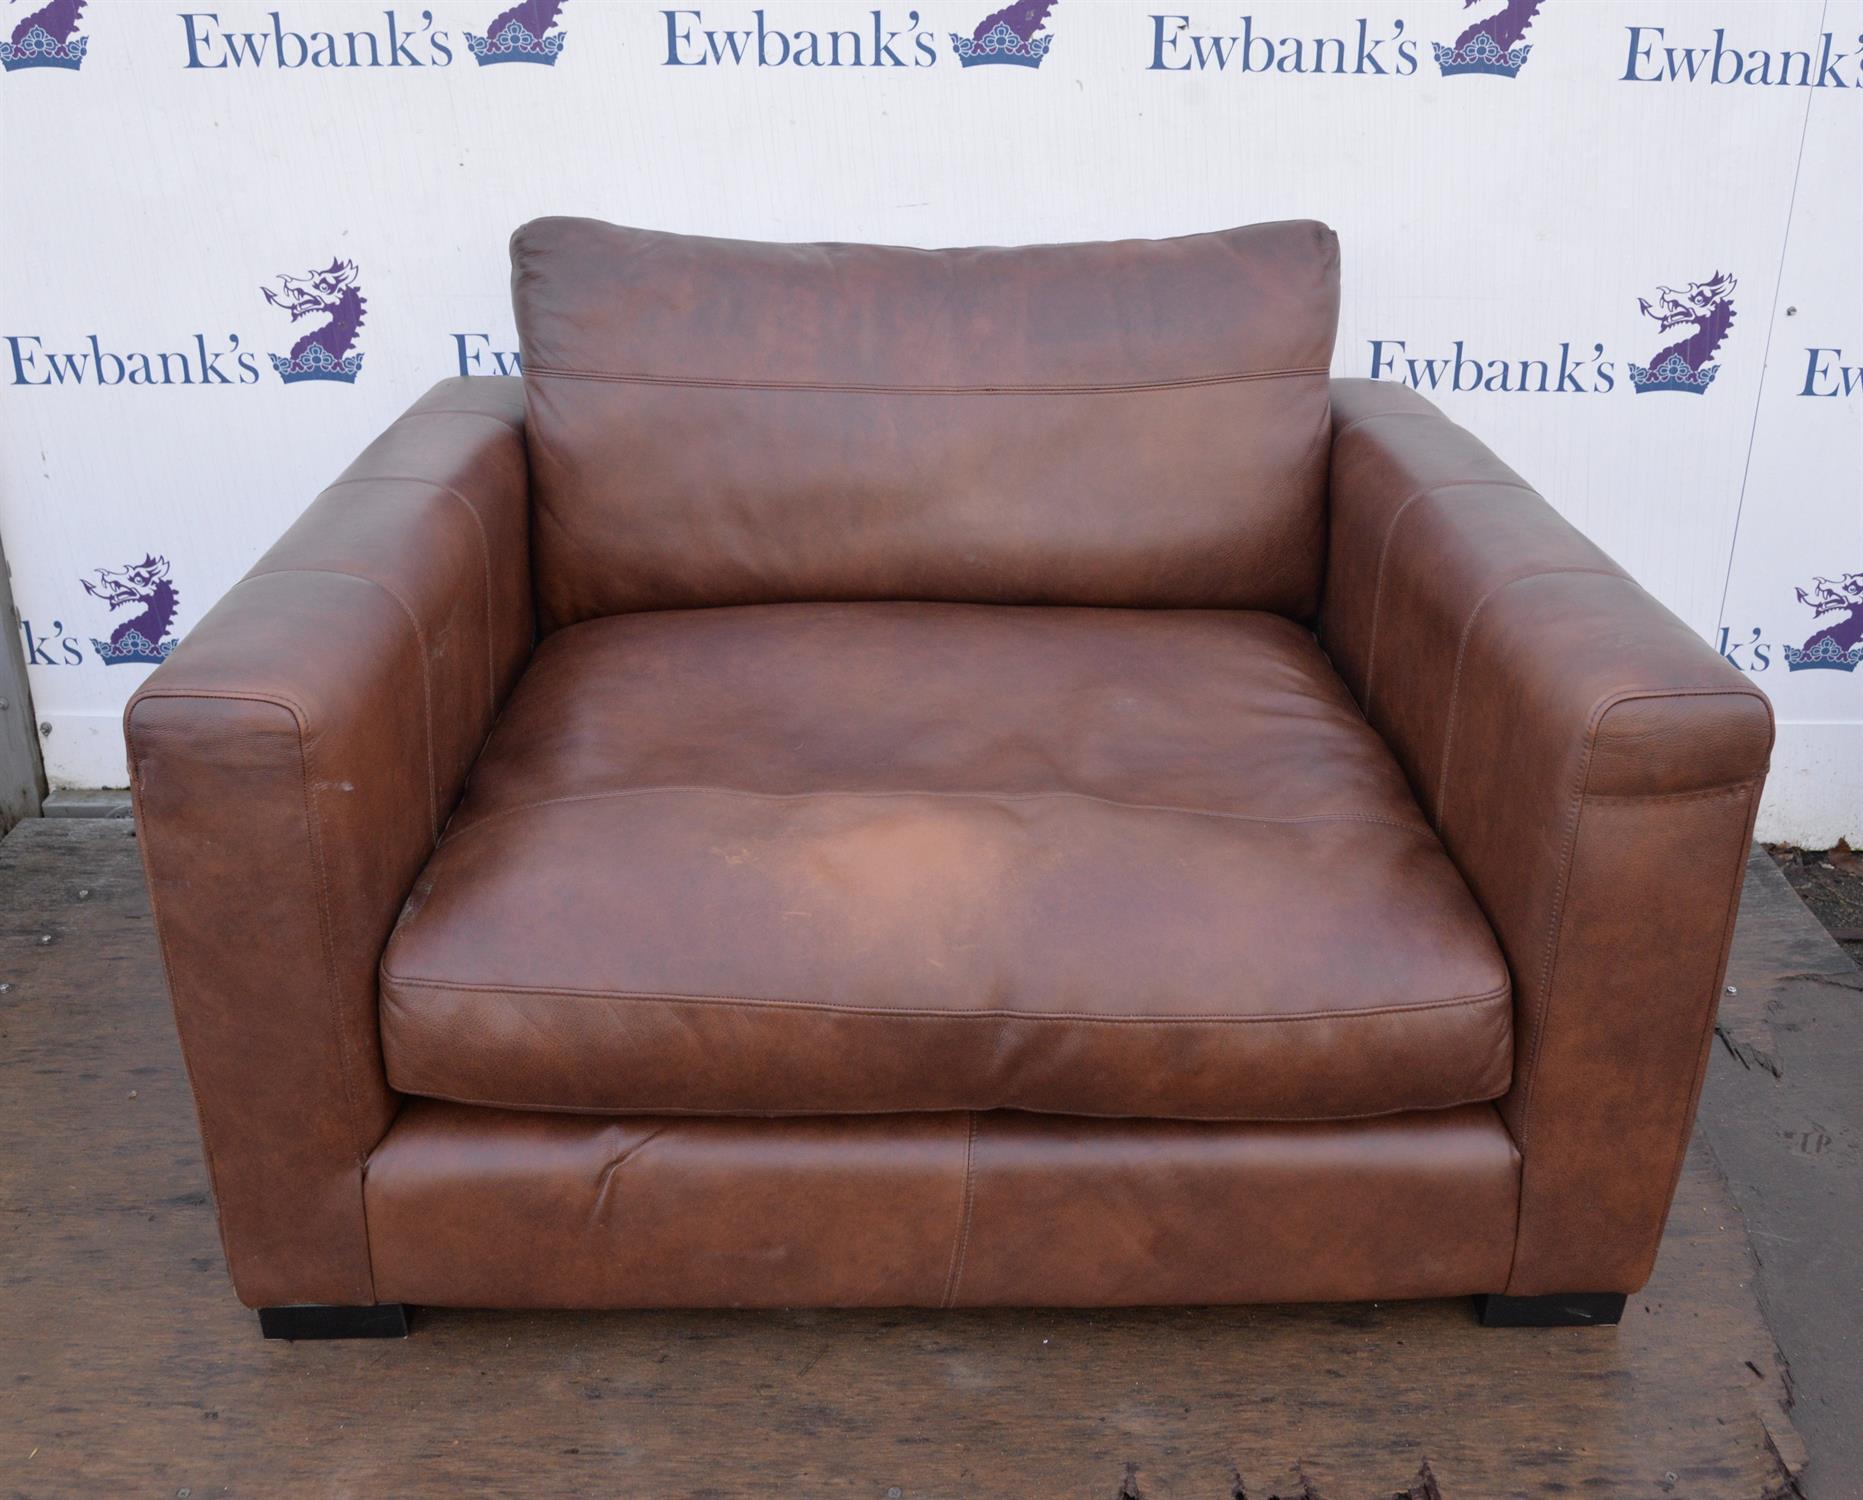 A large brown leather upholstered armchair raised on pad feet. 126 cm wide x 120 cm deep x 66 cm